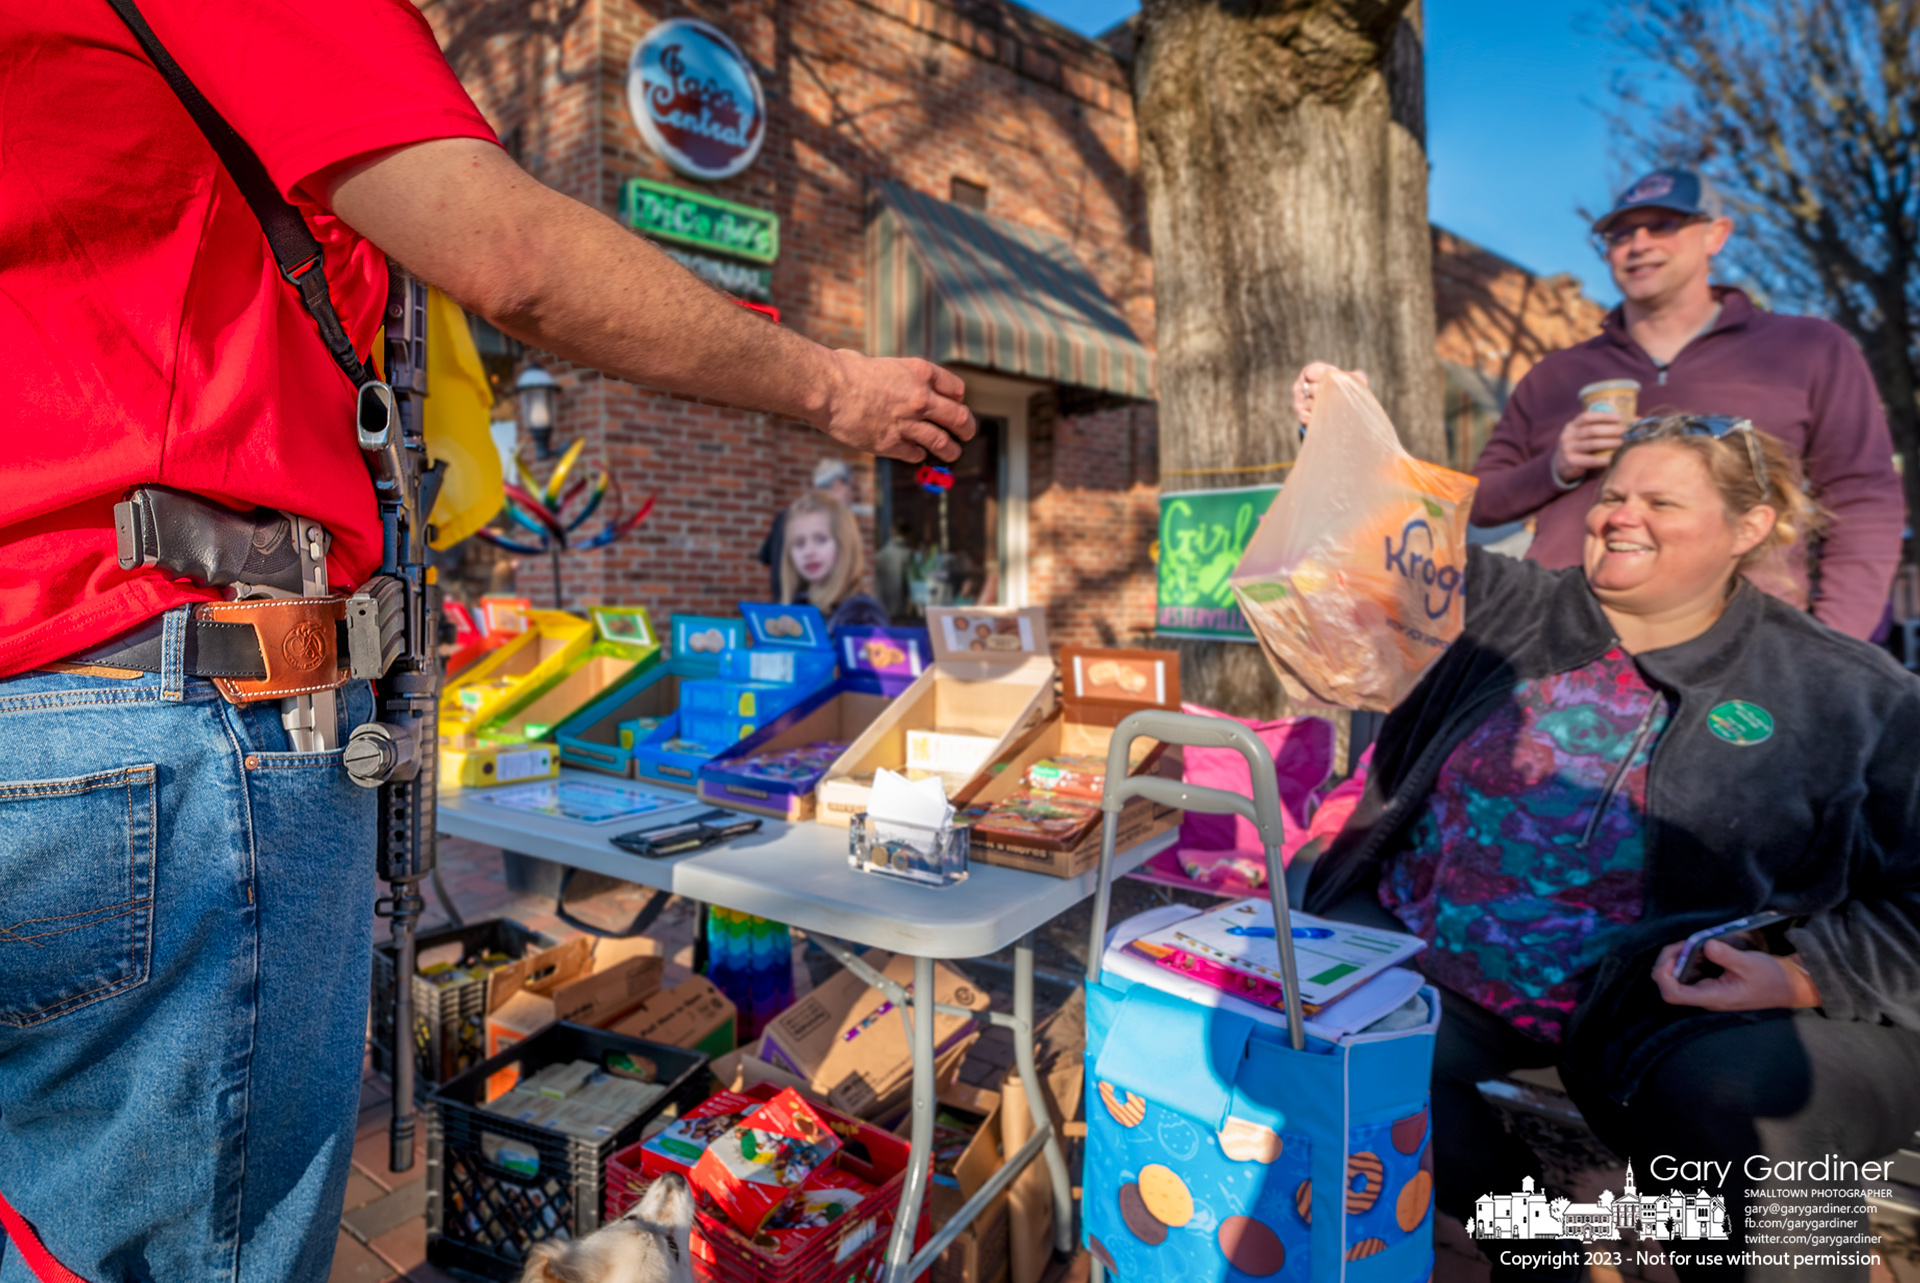 A gun-rights advocate carrying a semi-automatic rifle and pistol buys Girl Scout cookies from a stand set up at the brick walk beside Java Central in Uptown Westerville. My Final Photo for February 25, 2023.